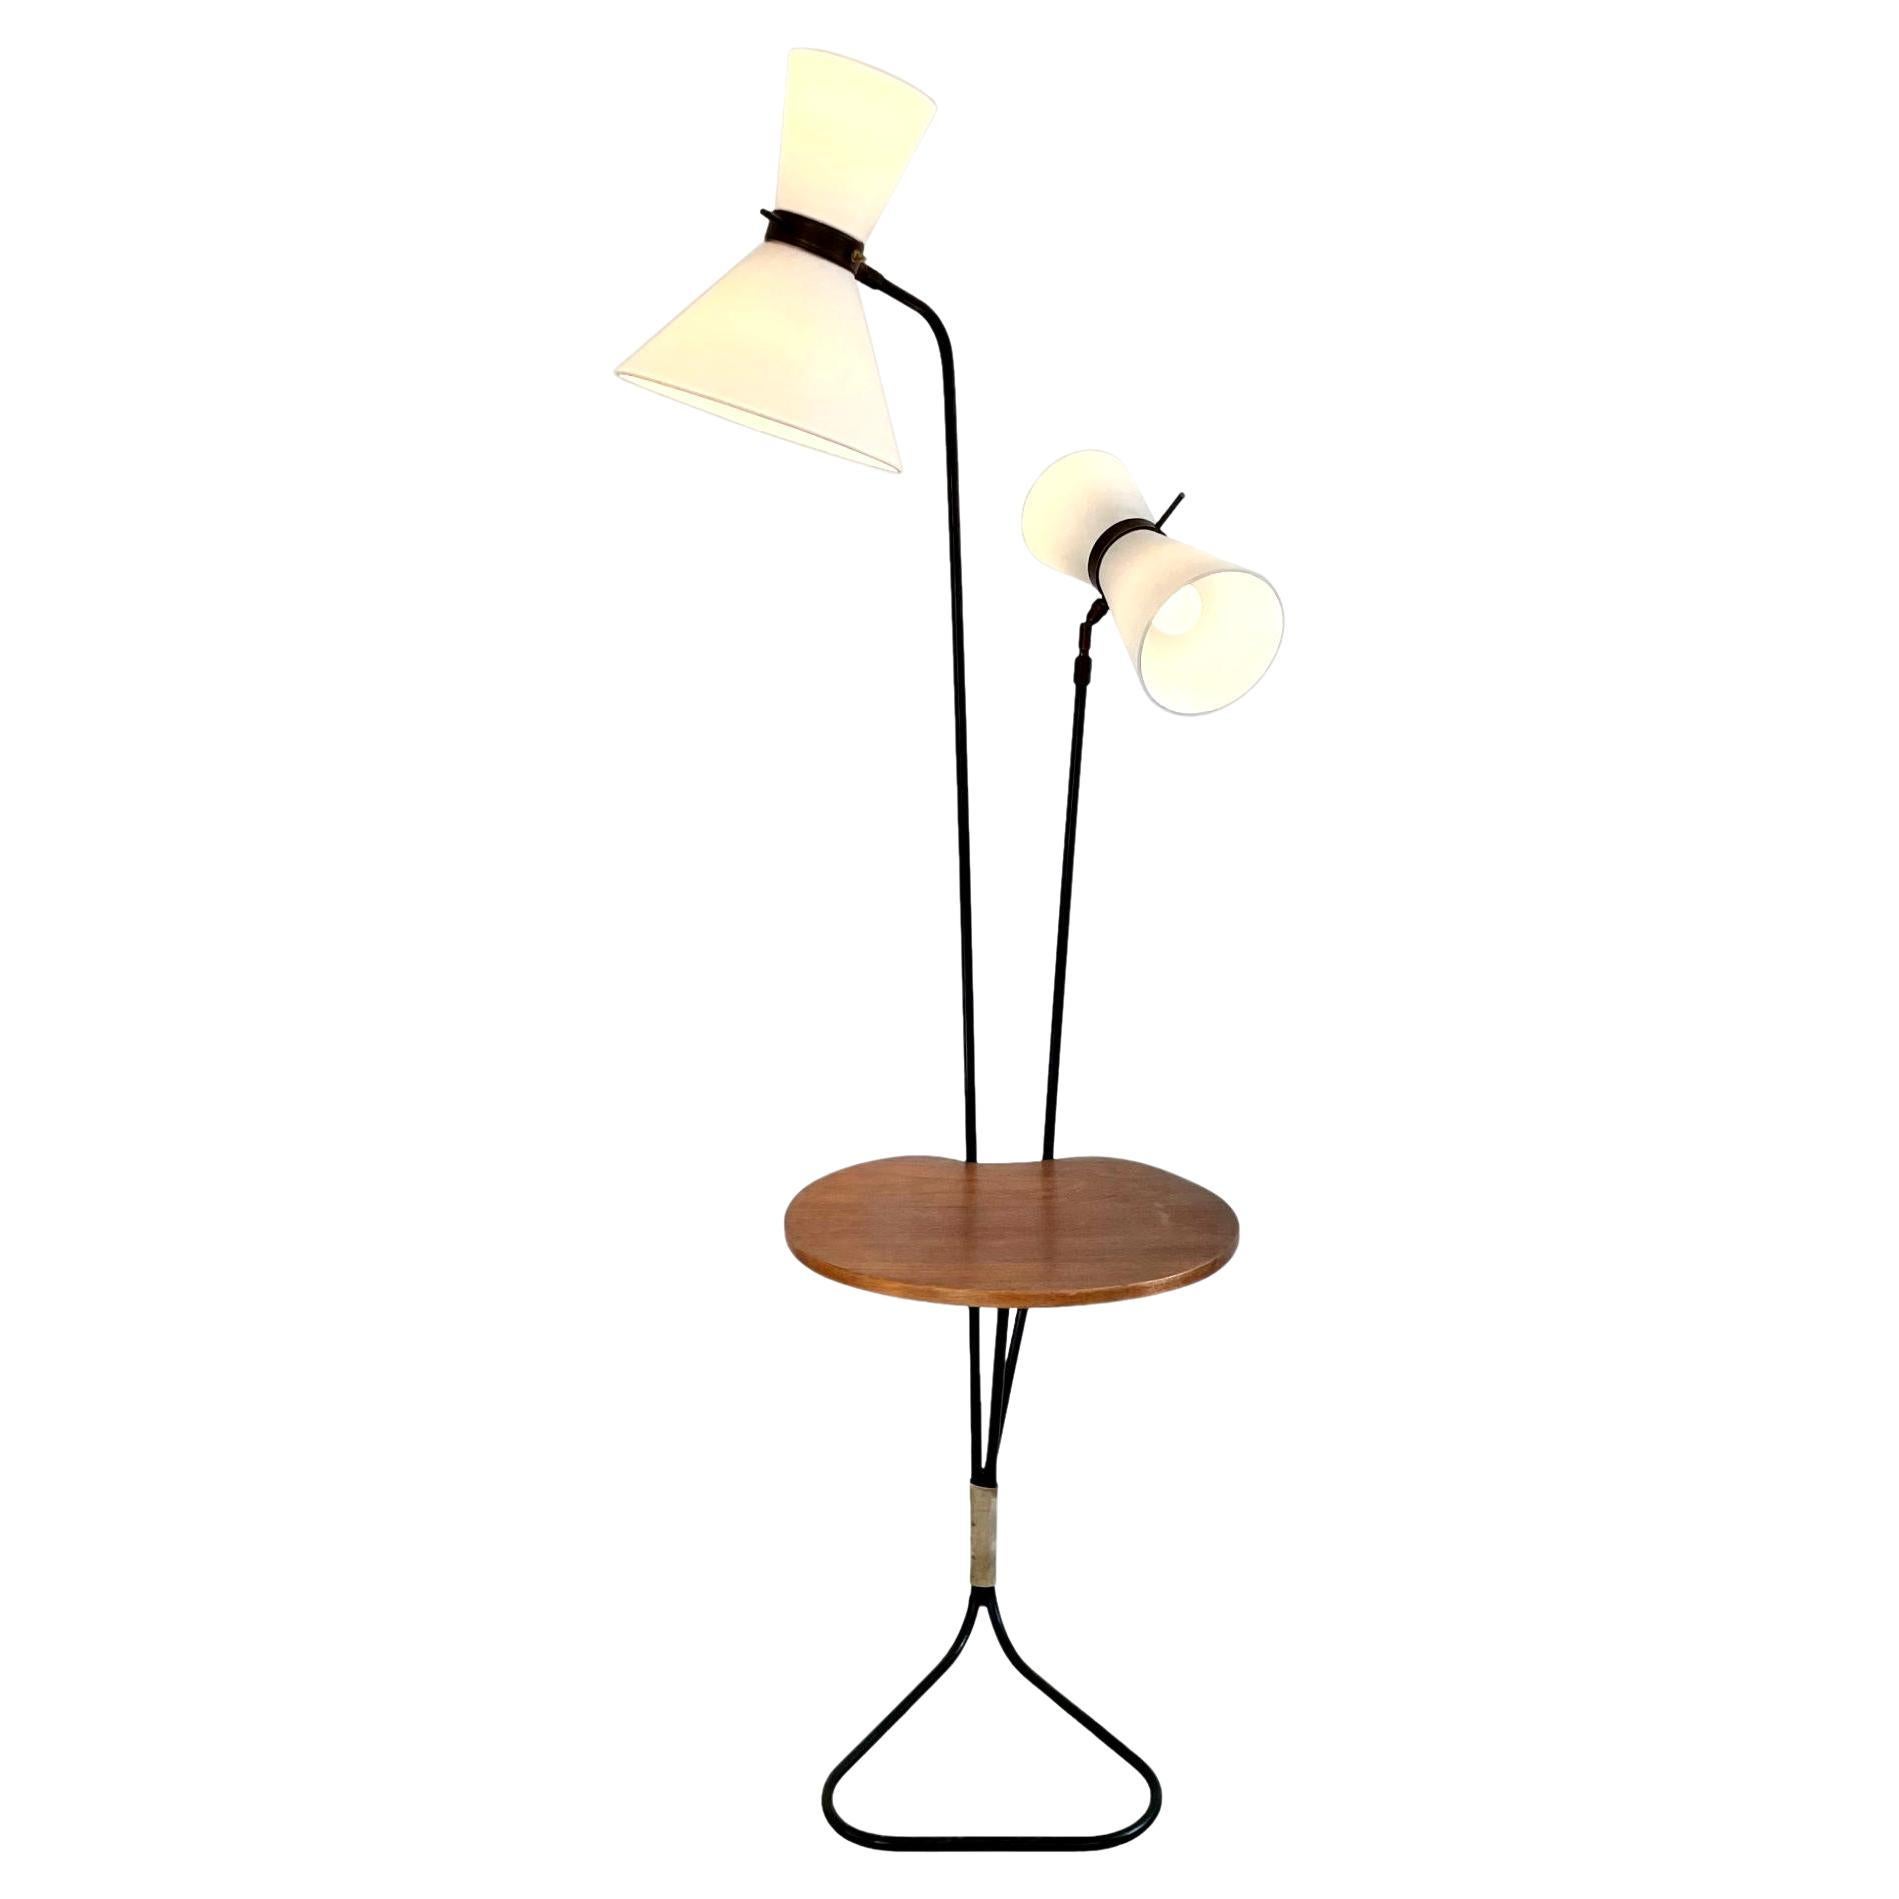 Double Headed Articulating Floor Lamp, 1950s France For Sale